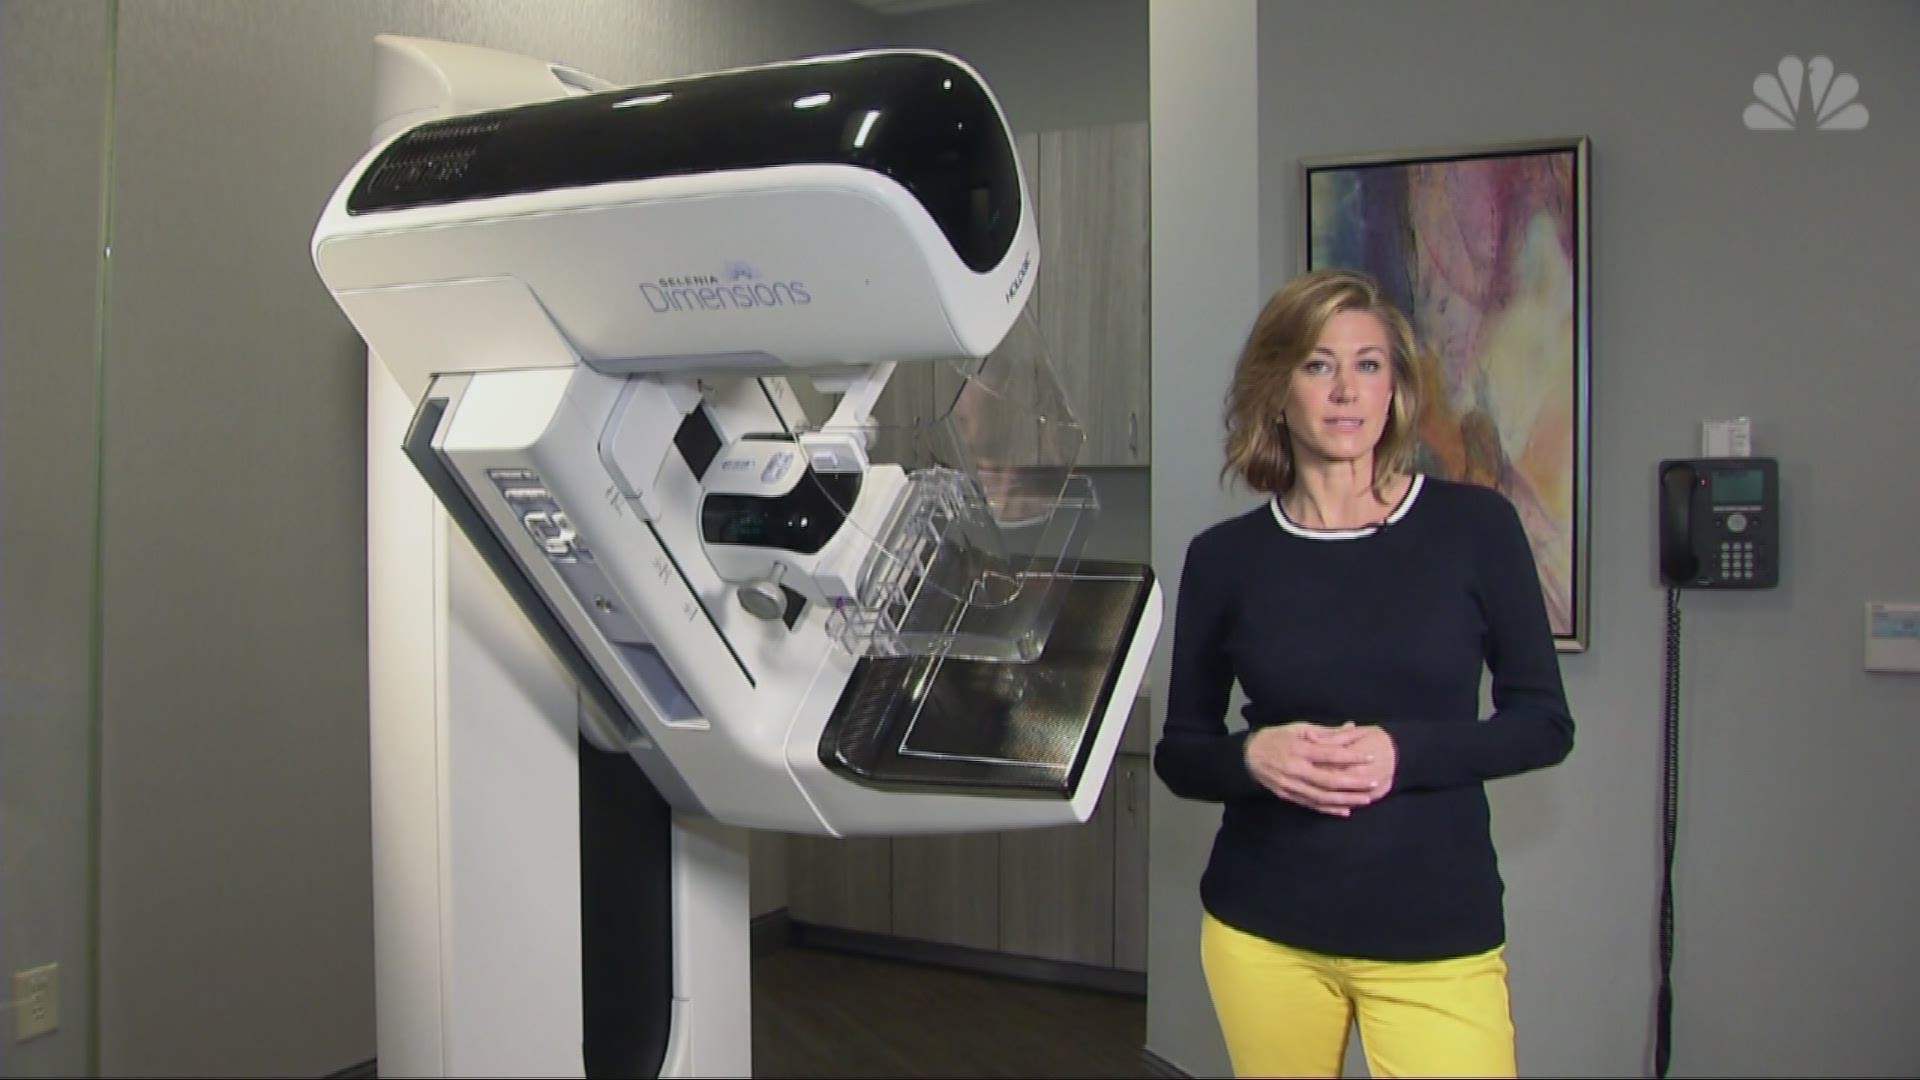 Breast cancer screening recommendations have changed in the past few years, and some are being encouraged to start younger. Health reporter Erika Edwards walks you through what to expect when undergoing your first mammogram.